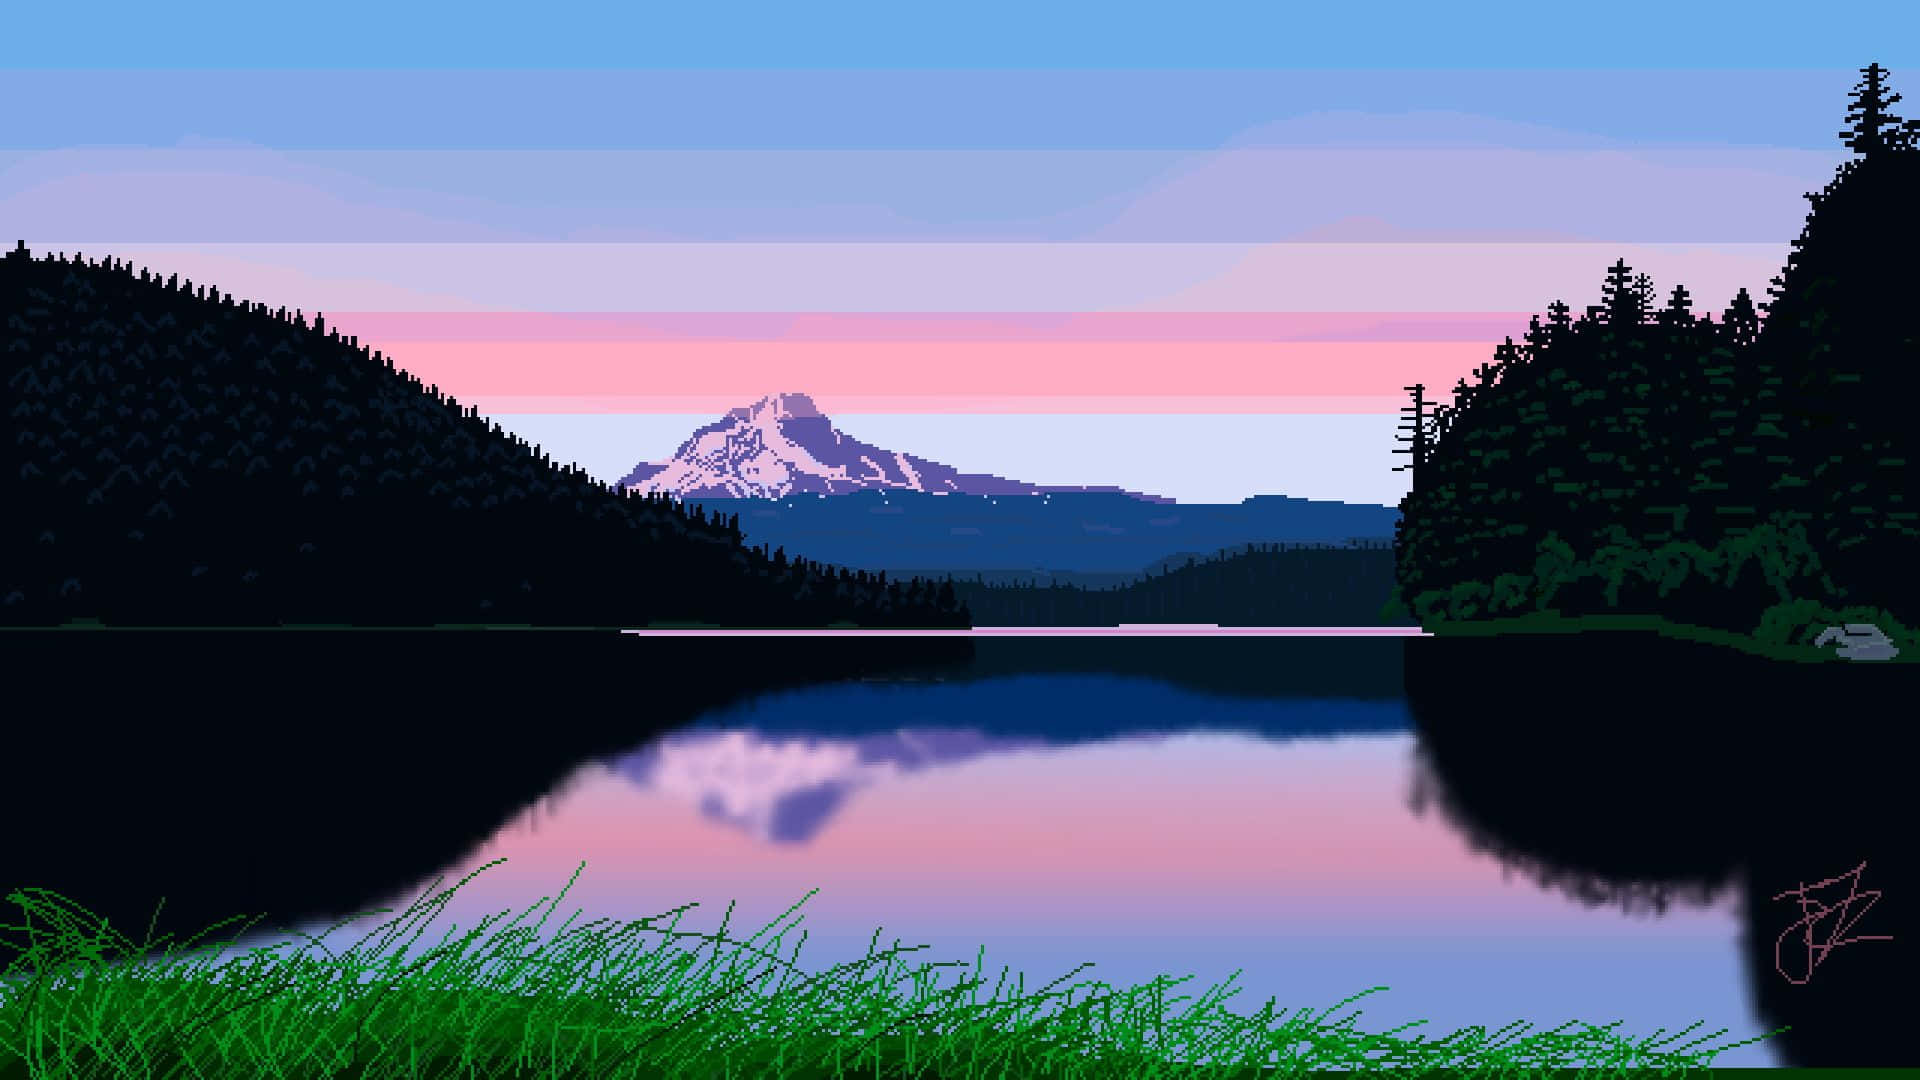 Take a journey into this surreal pixel landscape Wallpaper